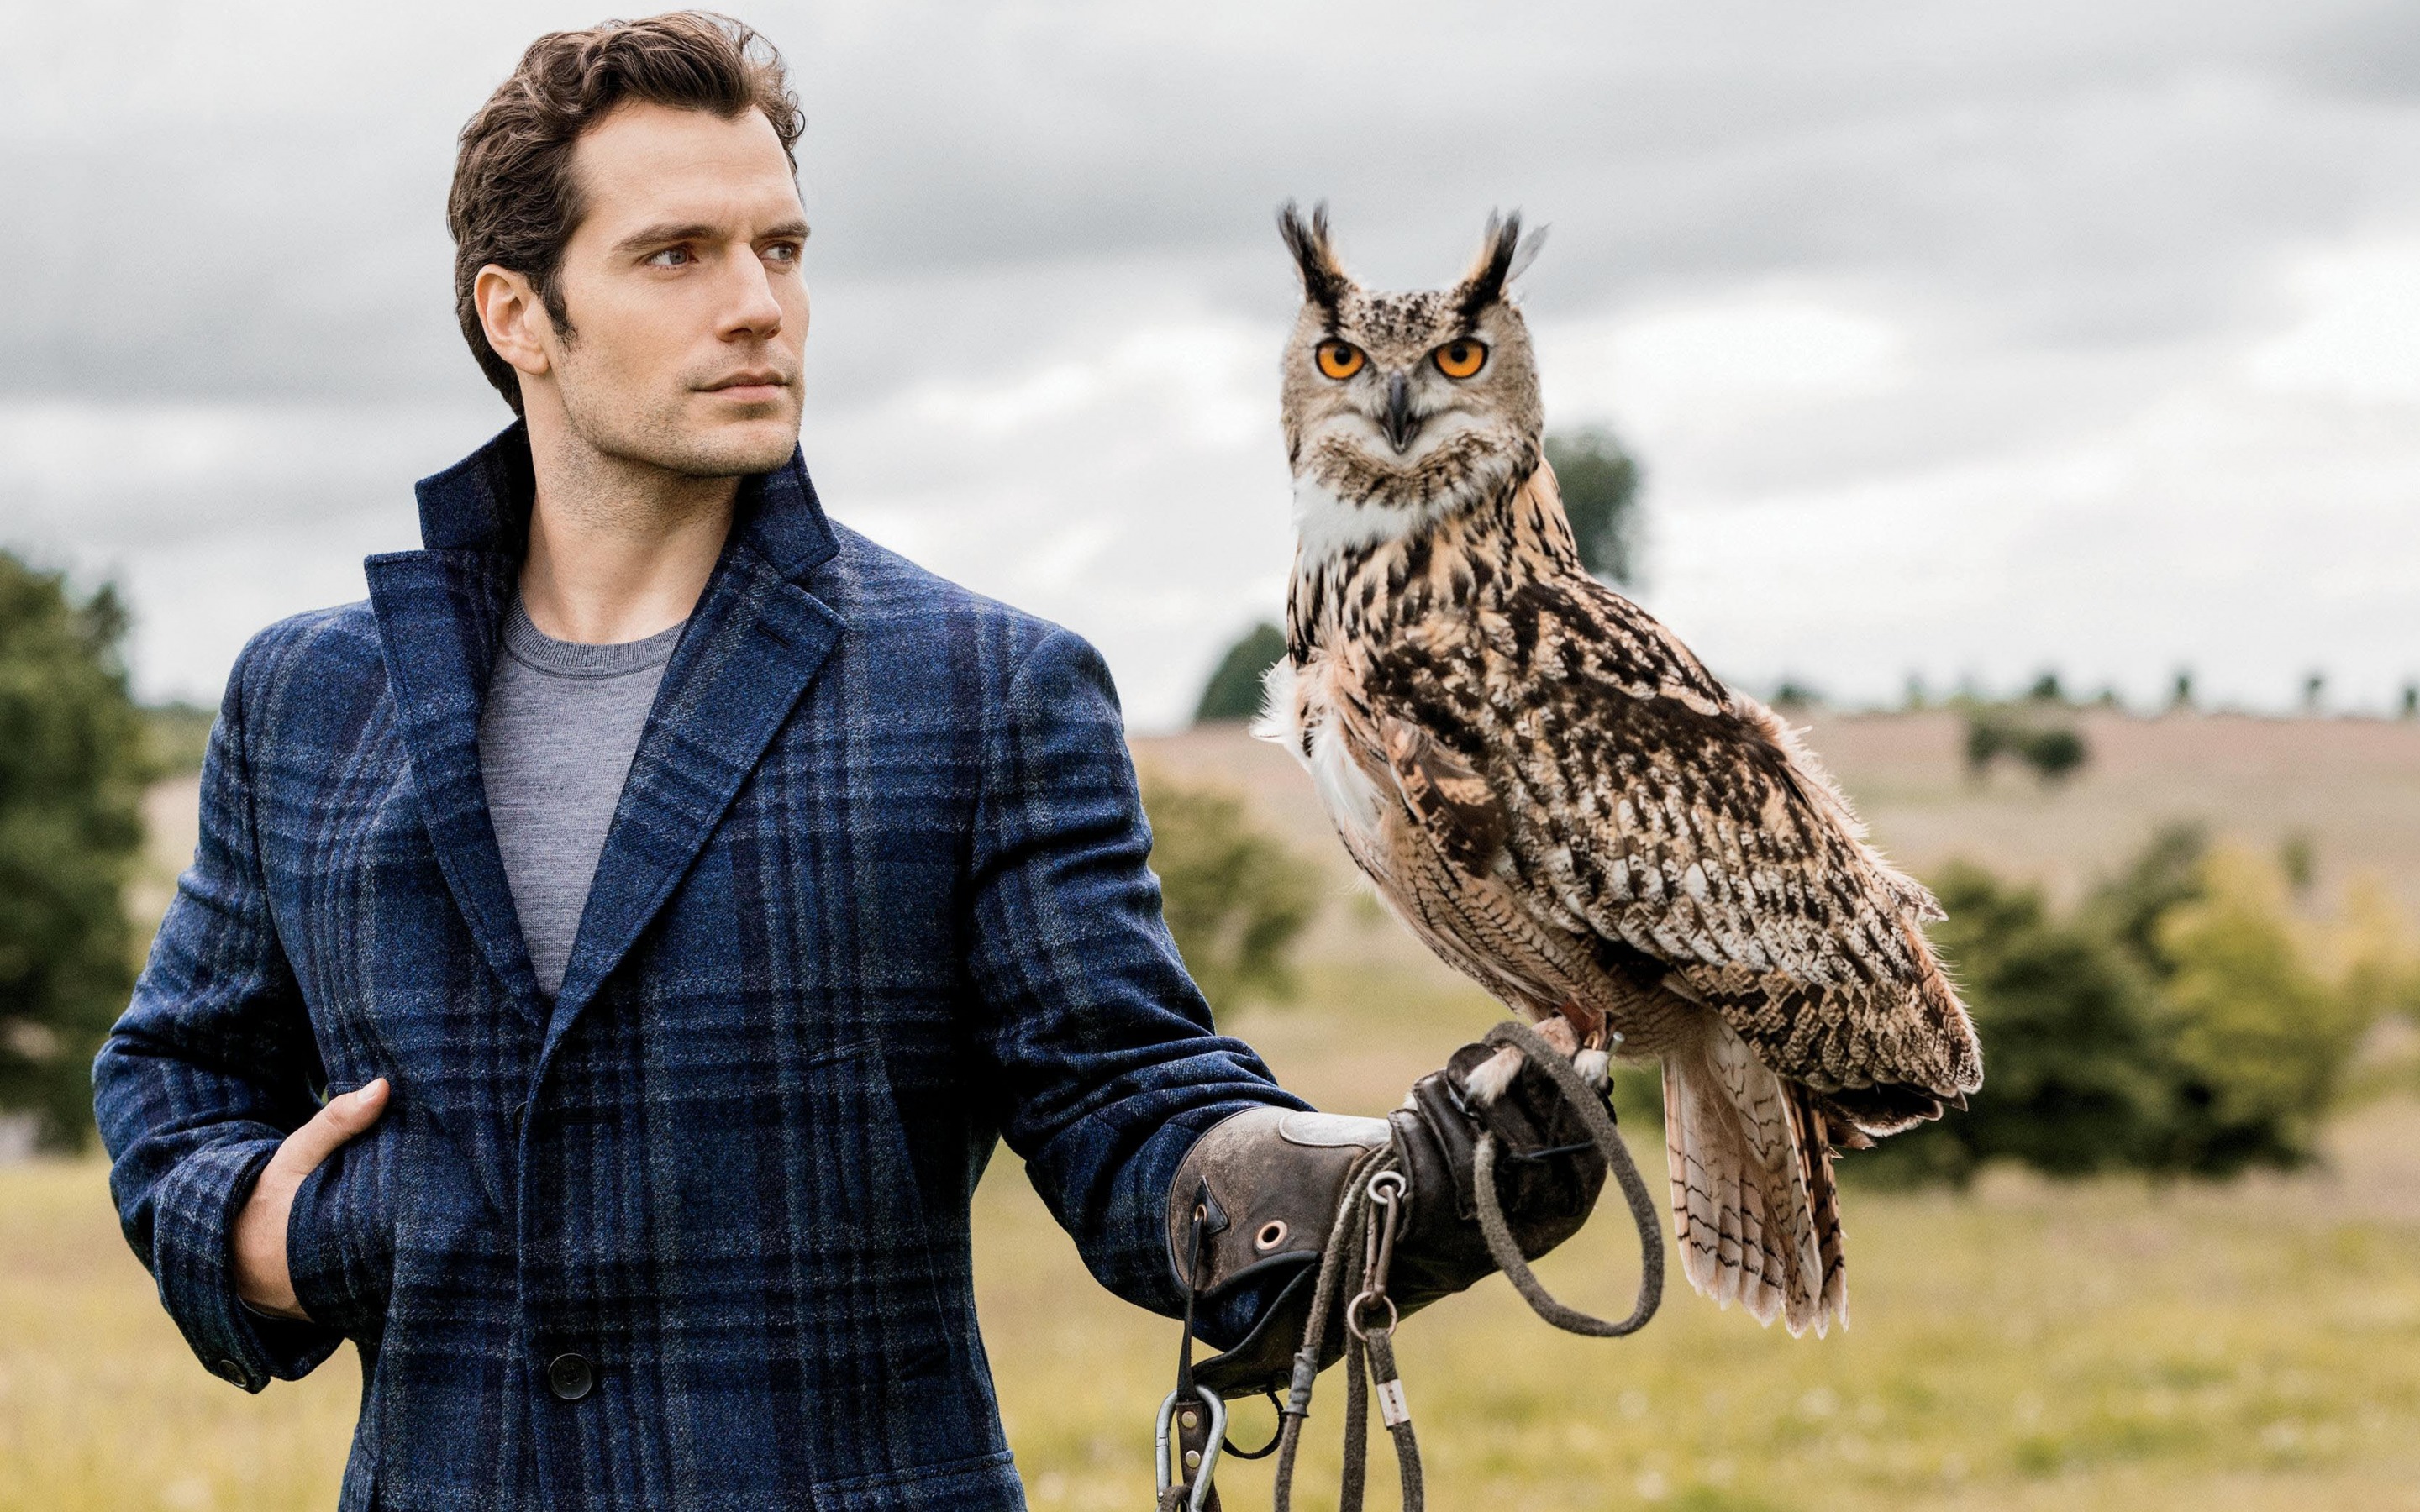 Henry Cavill, English actor, photoshoot, man with bird, eagle owl, blue Eng...